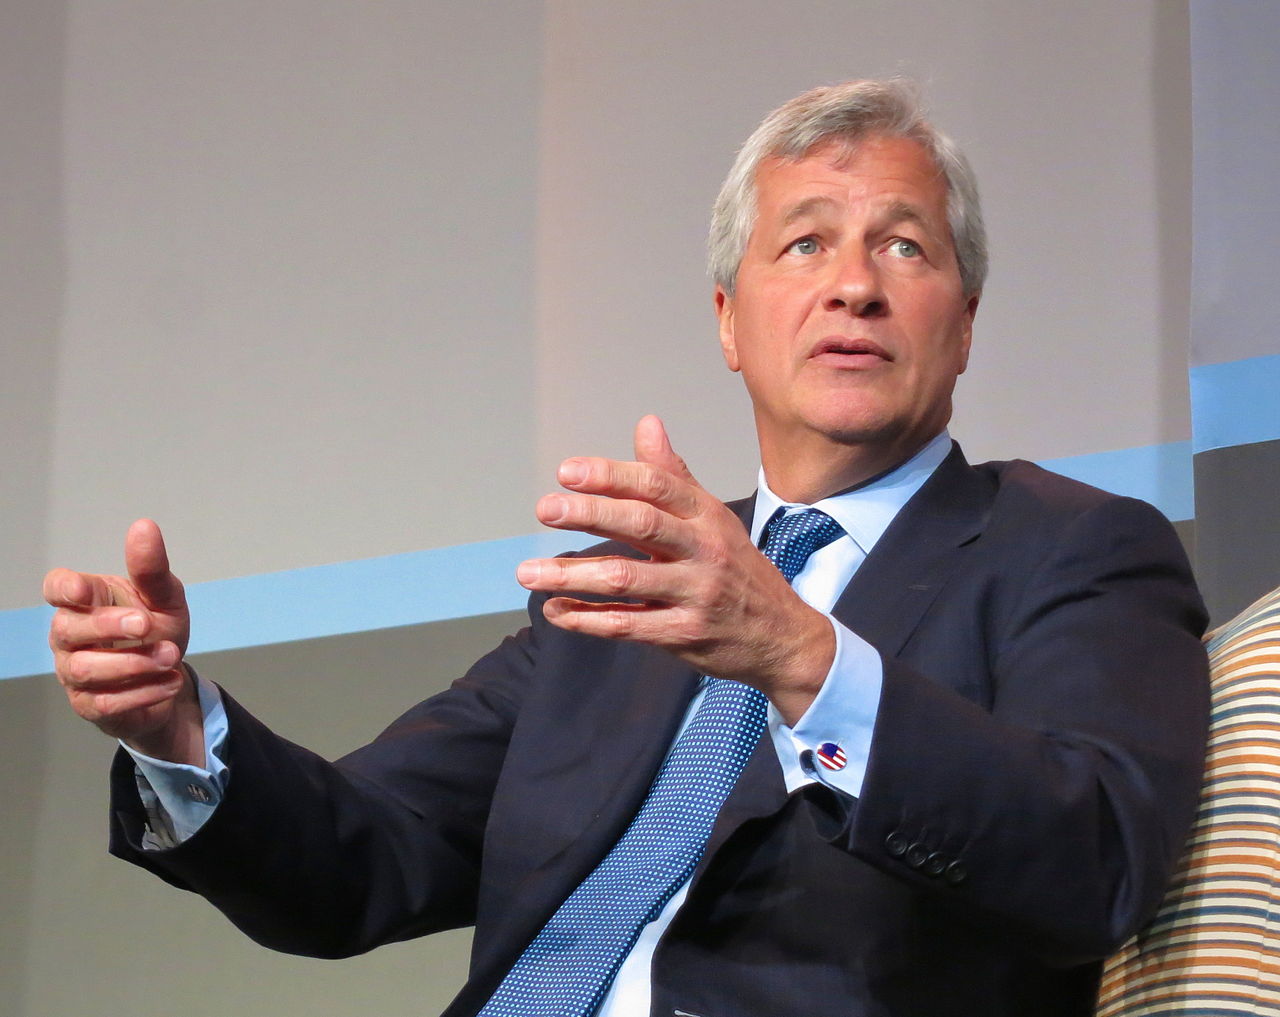 Image: JPMorgan CEO Jamie Dimon: US could experience RECESSION within 6 to 9 months